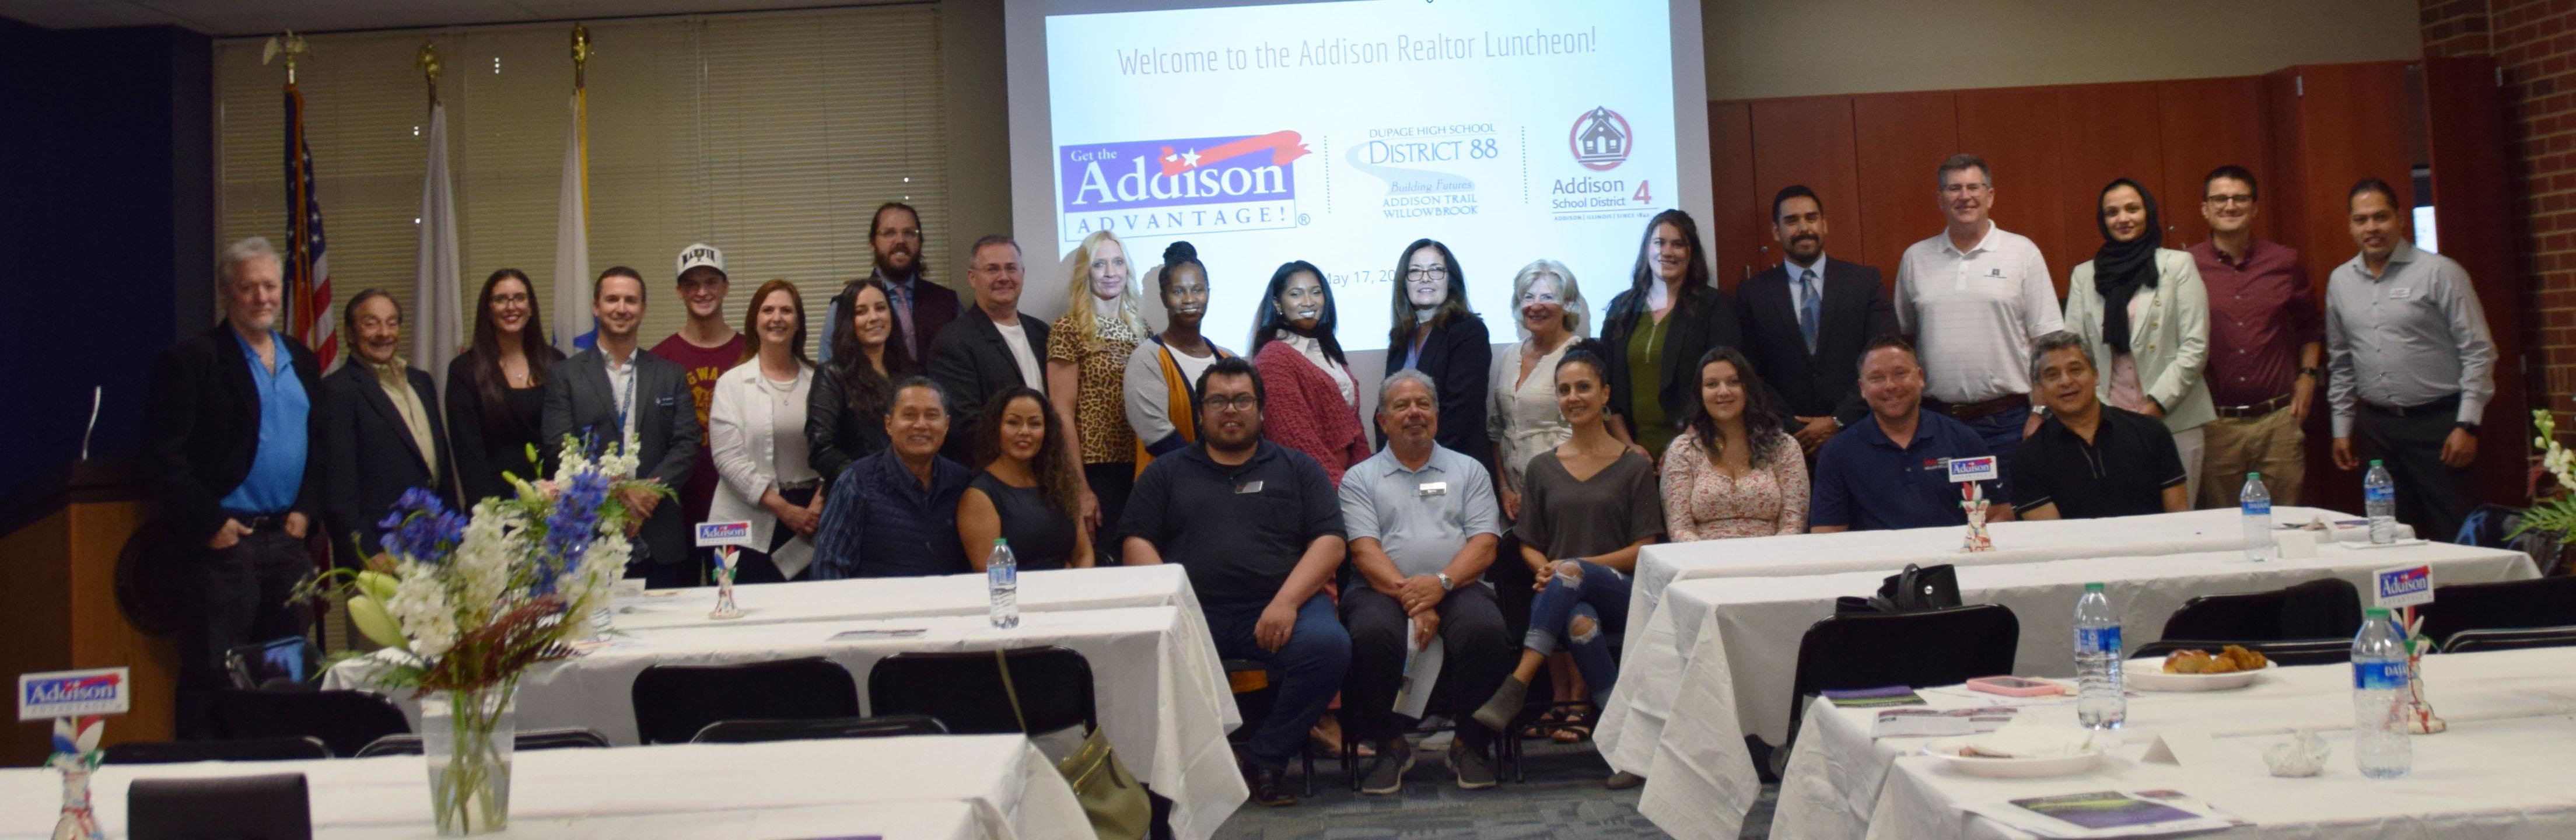 District 88 partners with villages of Addison, Lombard and Villa Park and school districts 4, 45 and 48 to host Realtor luncheons